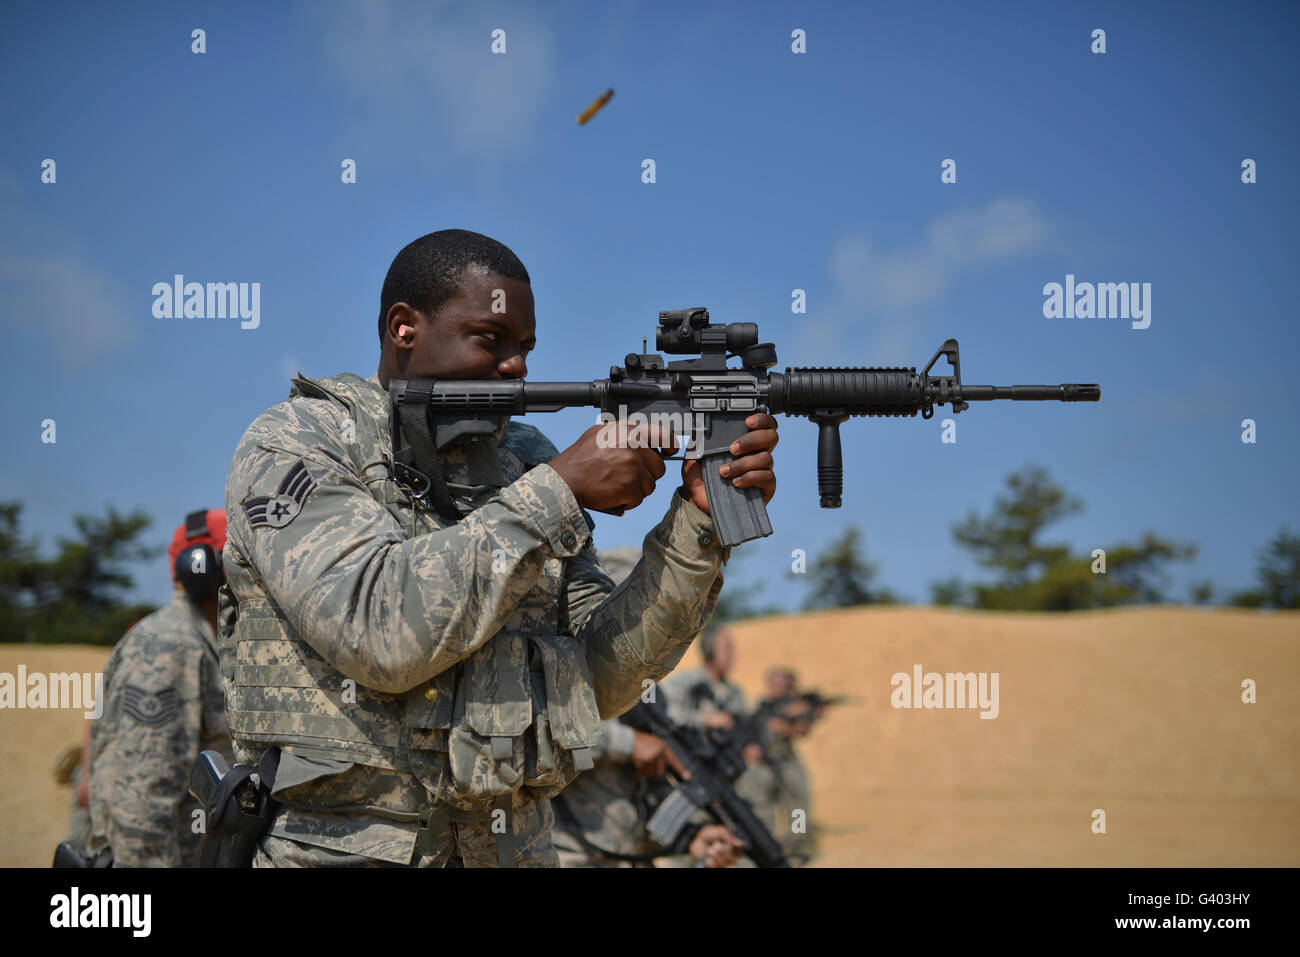 Members of the Security Forces Squadron train on M4 carbines. Stock Photo